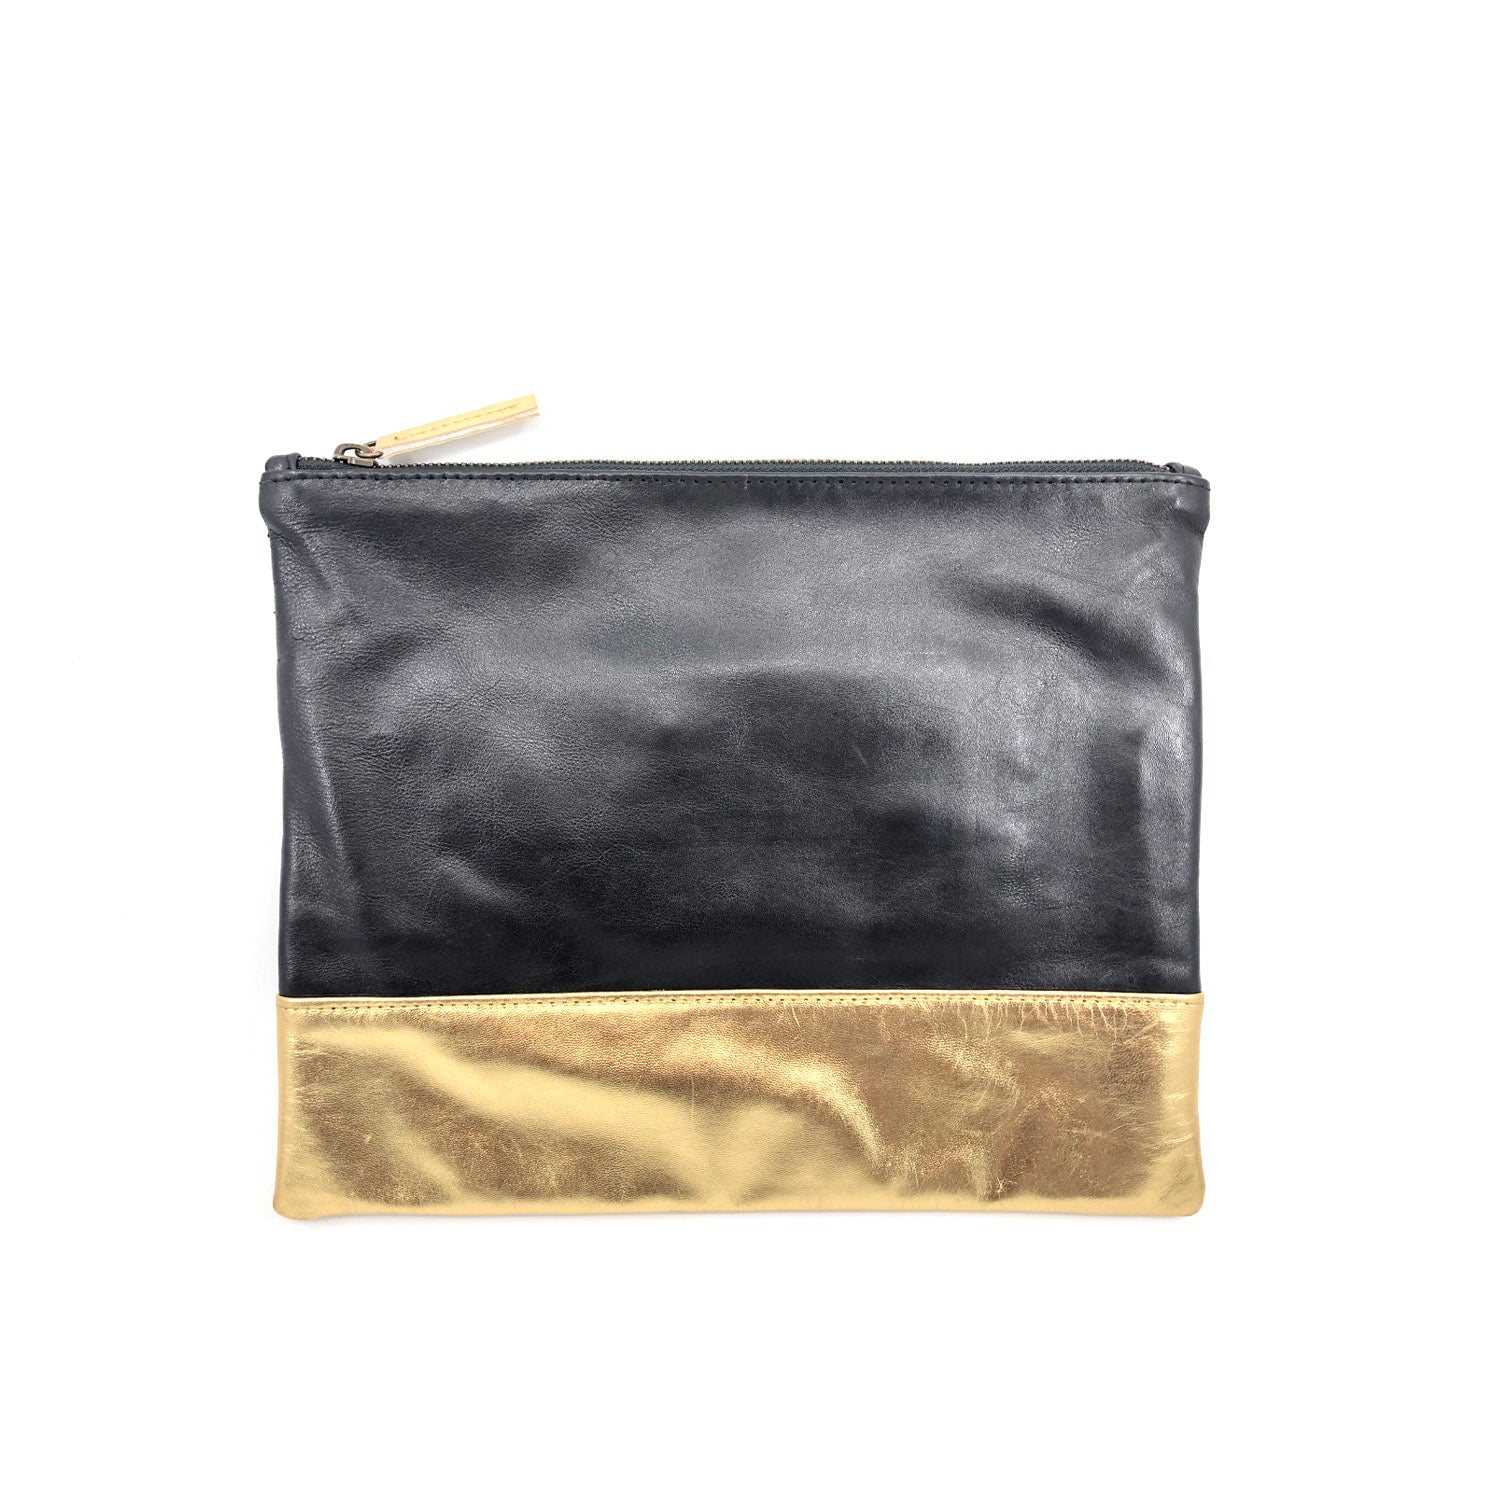 Austin Basics Large Gold Leather Clutch - Collector Store